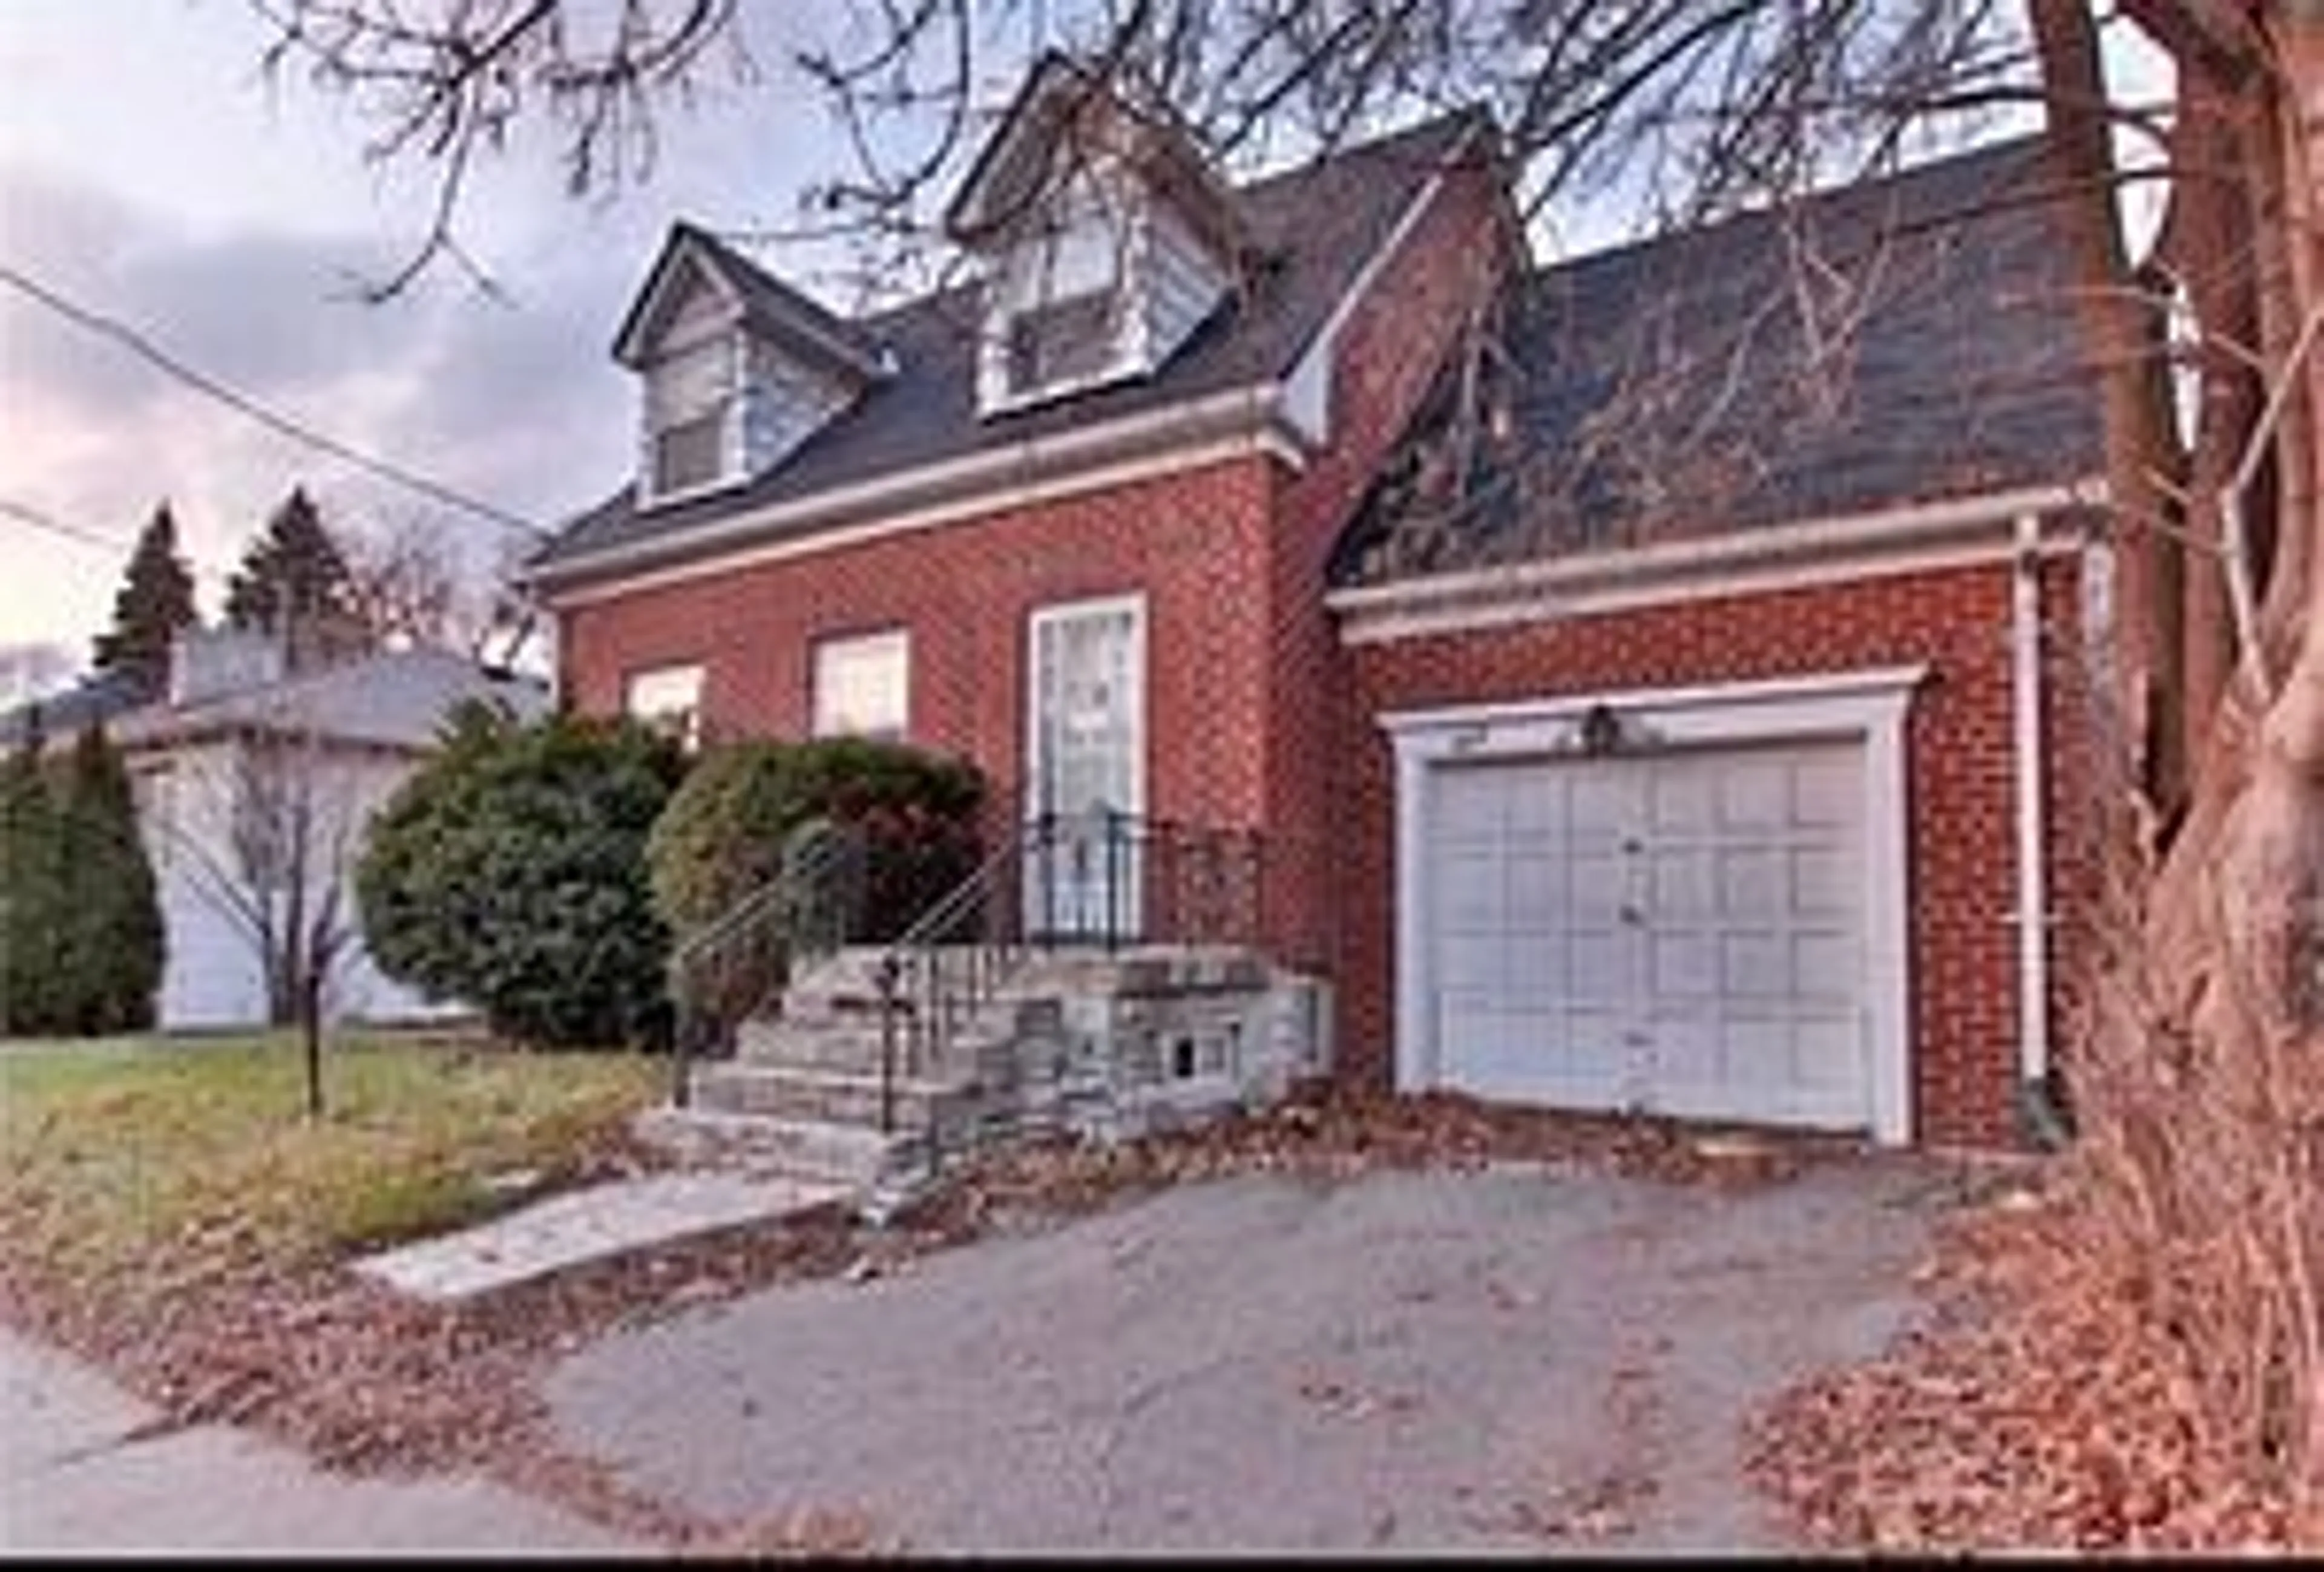 Home with brick exterior material for 362 Lawrence Ave, Toronto Ontario M5M 1B7